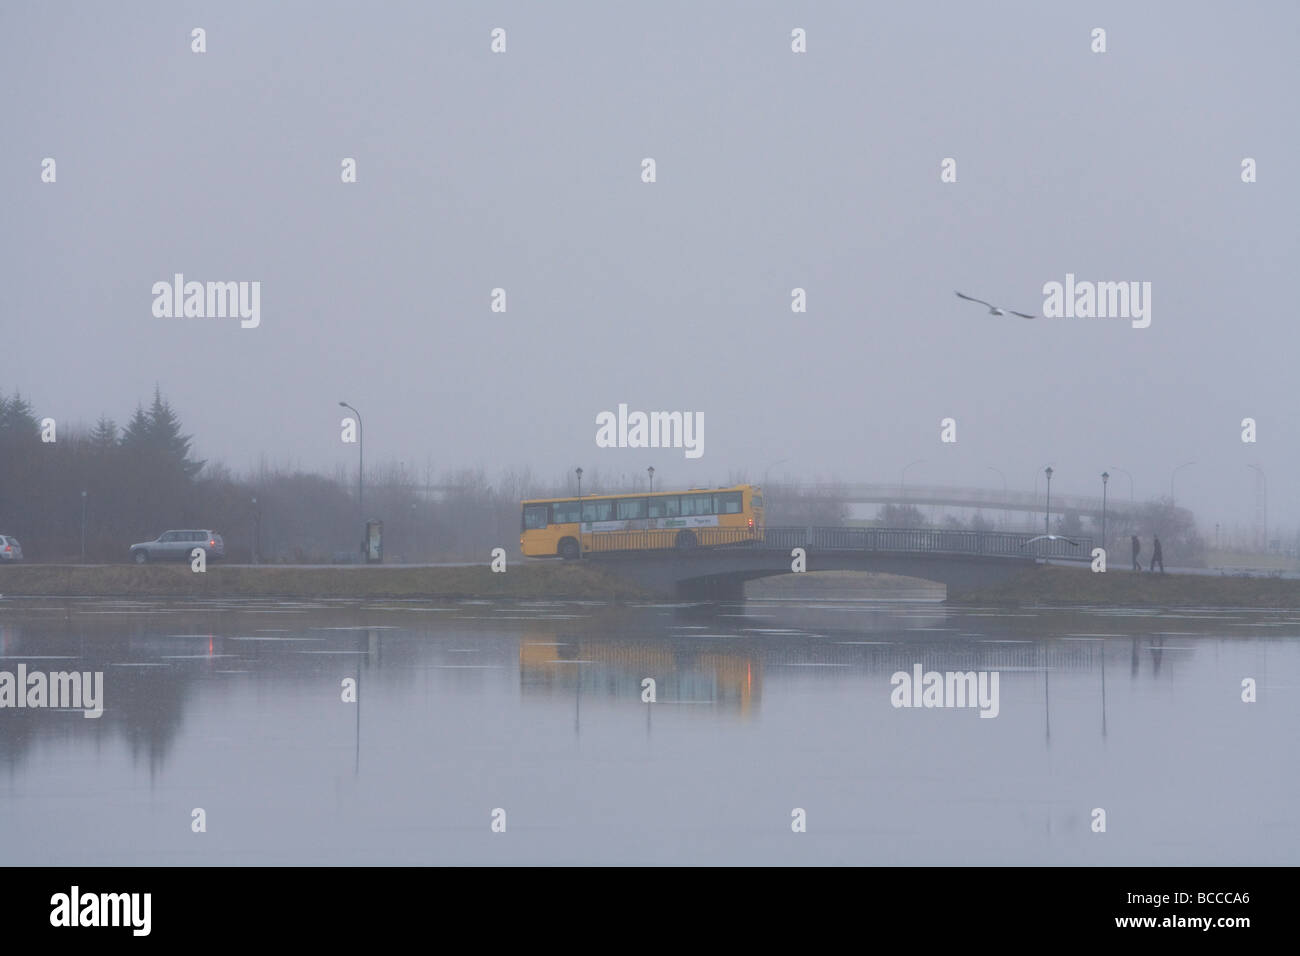 People crossing a bridge over Tjornin lake during a rainy foggy day Downtown Reykjavik Iceland Stock Photo